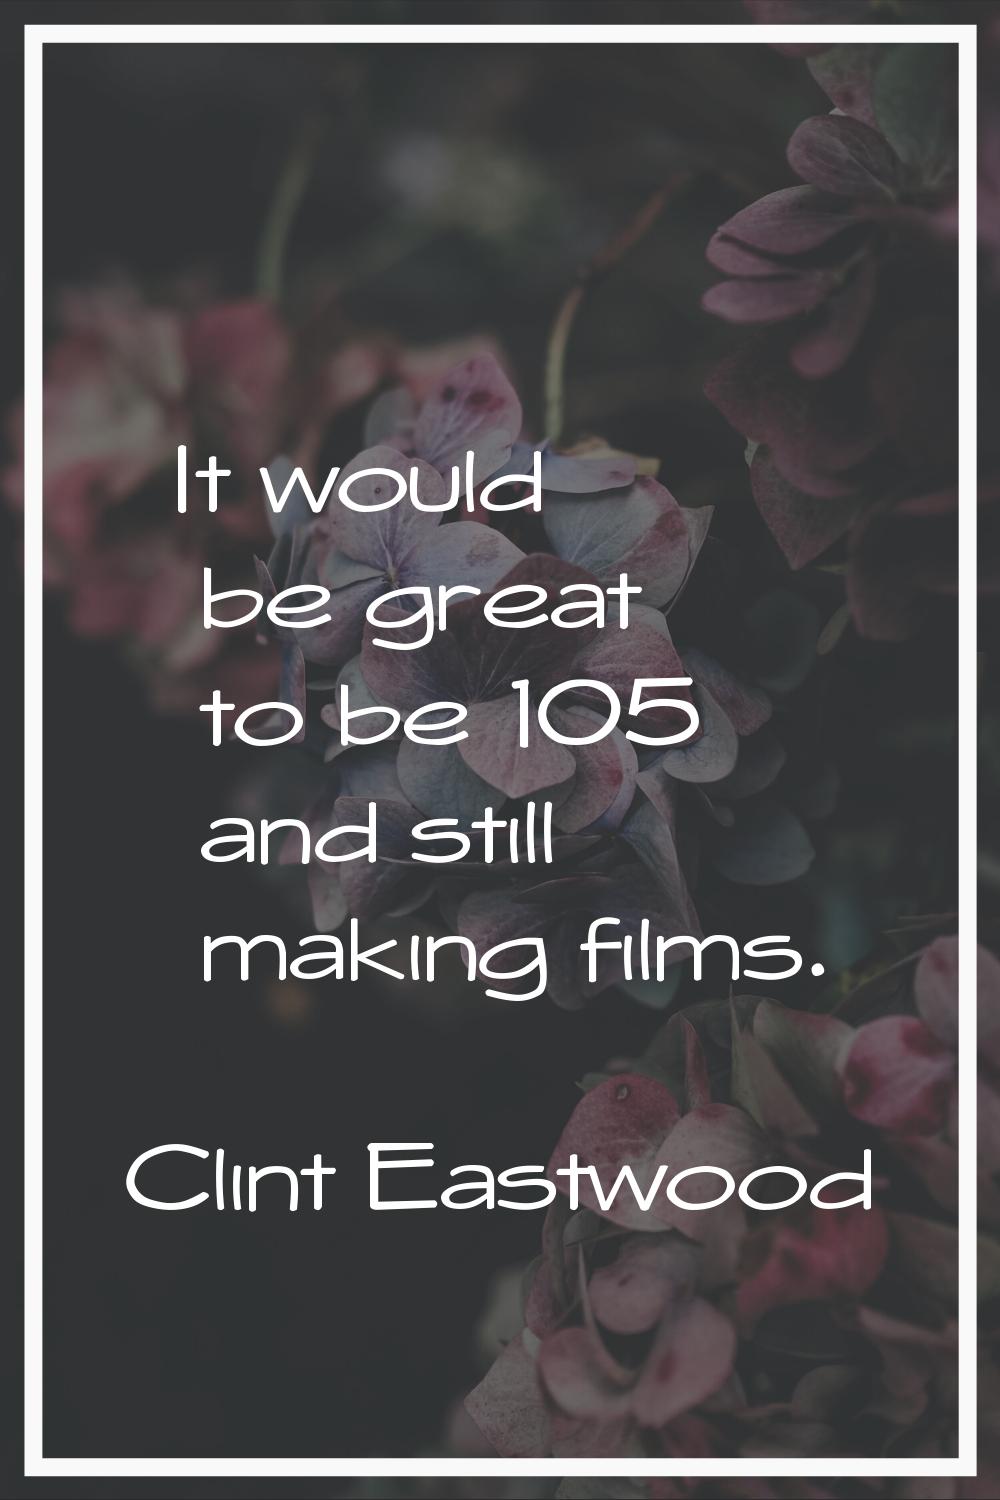 It would be great to be 105 and still making films.